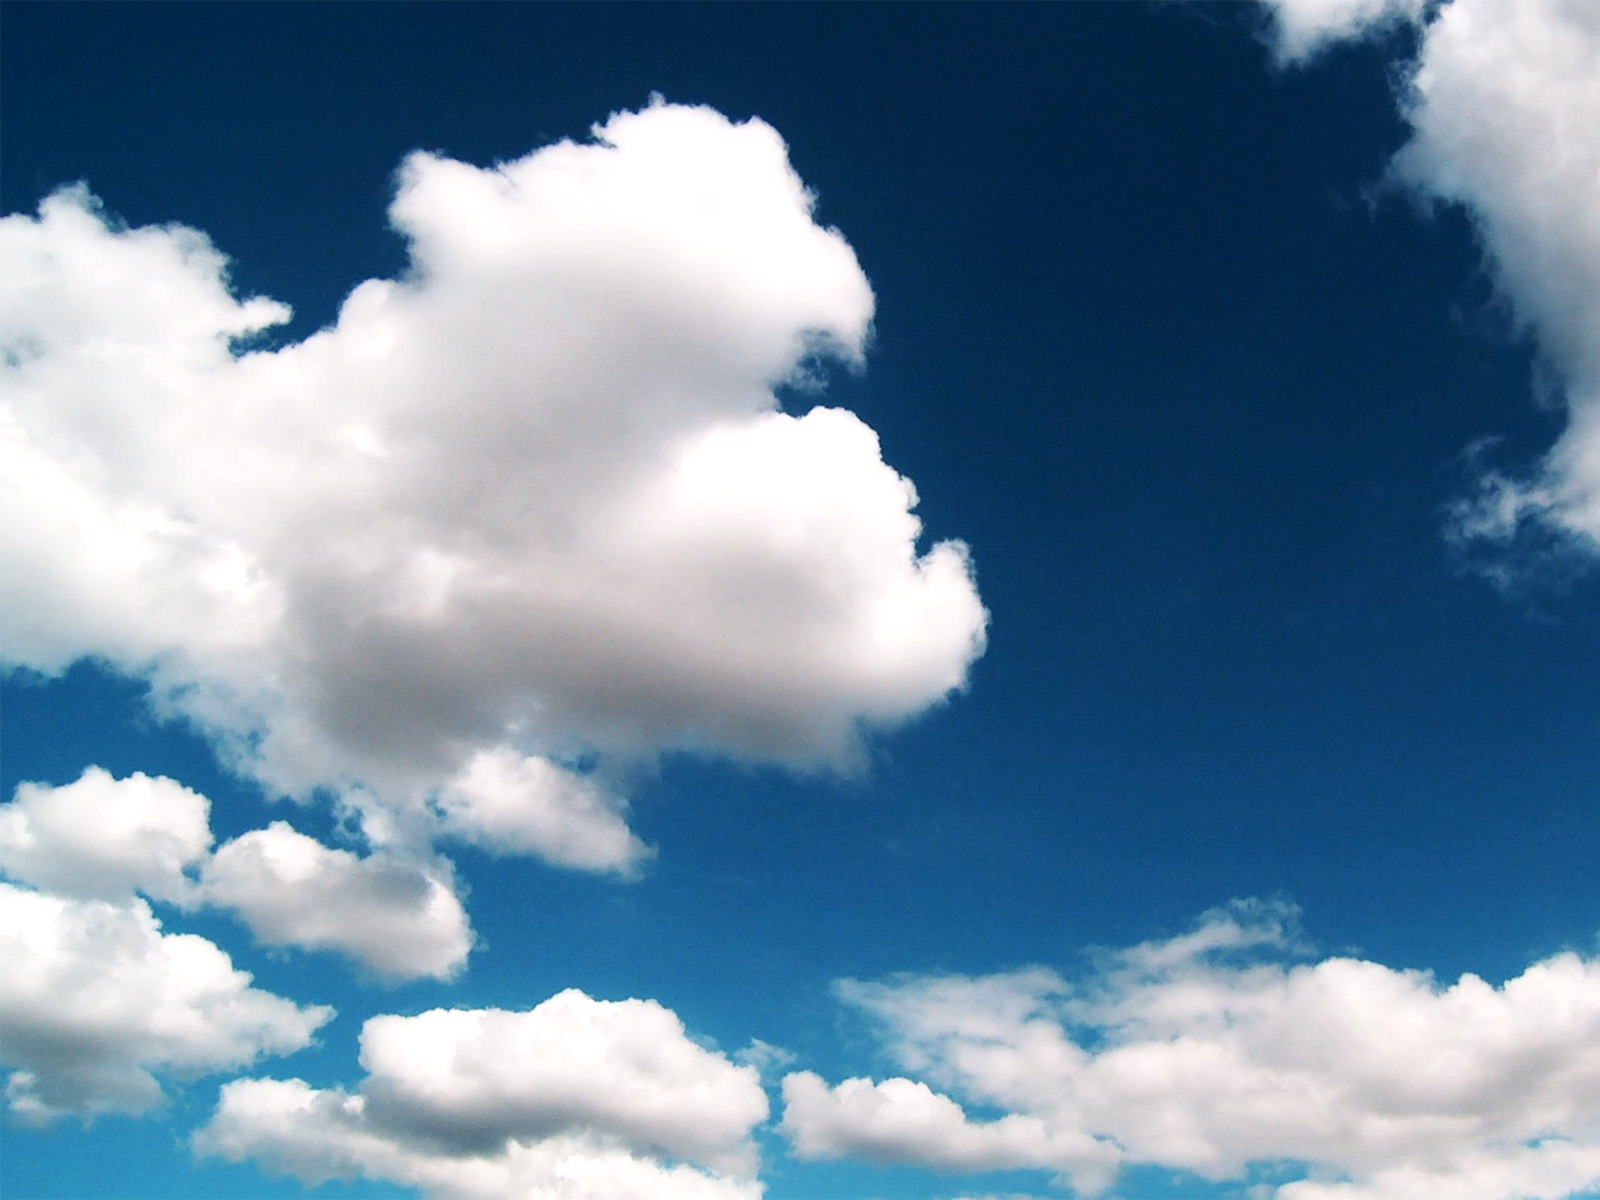 Blue Sky and Clouds Backgrounds for Powerpoint Templates - PPT ...